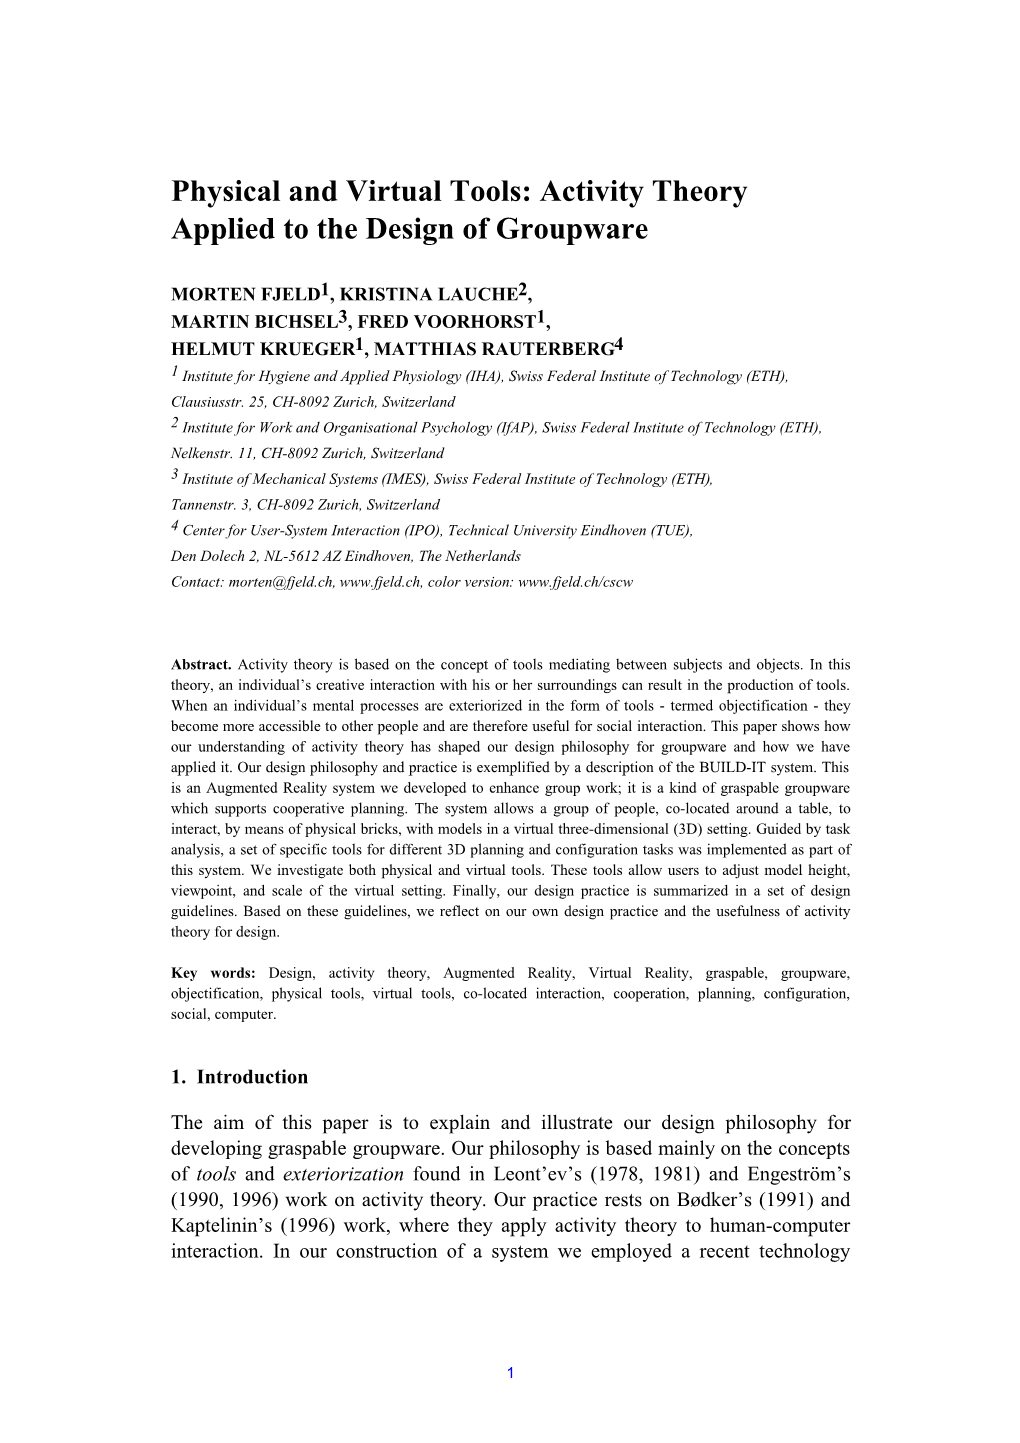 Physical and Virtual Tools: Activity Theory Applied to the Design of Groupware